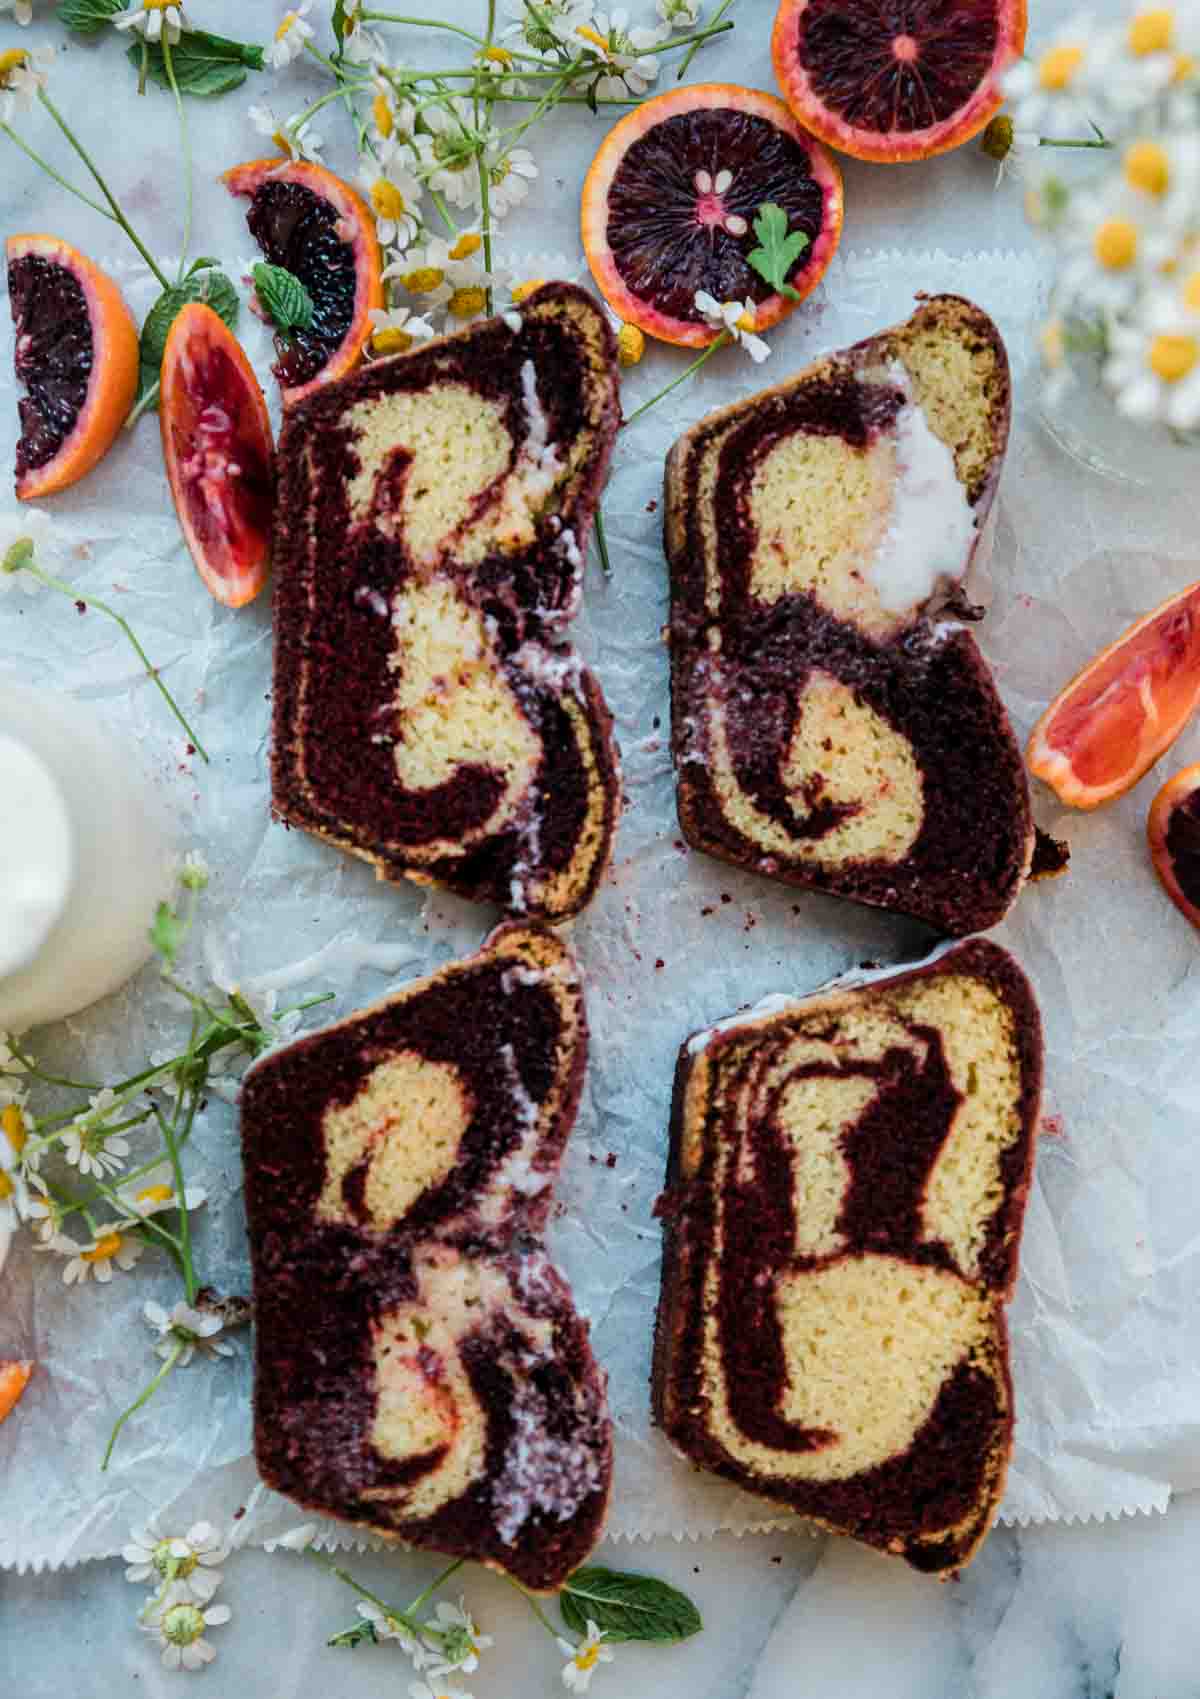 Sliced velvet loaf layed on a marble counter. There is oranges and flowers to the side.